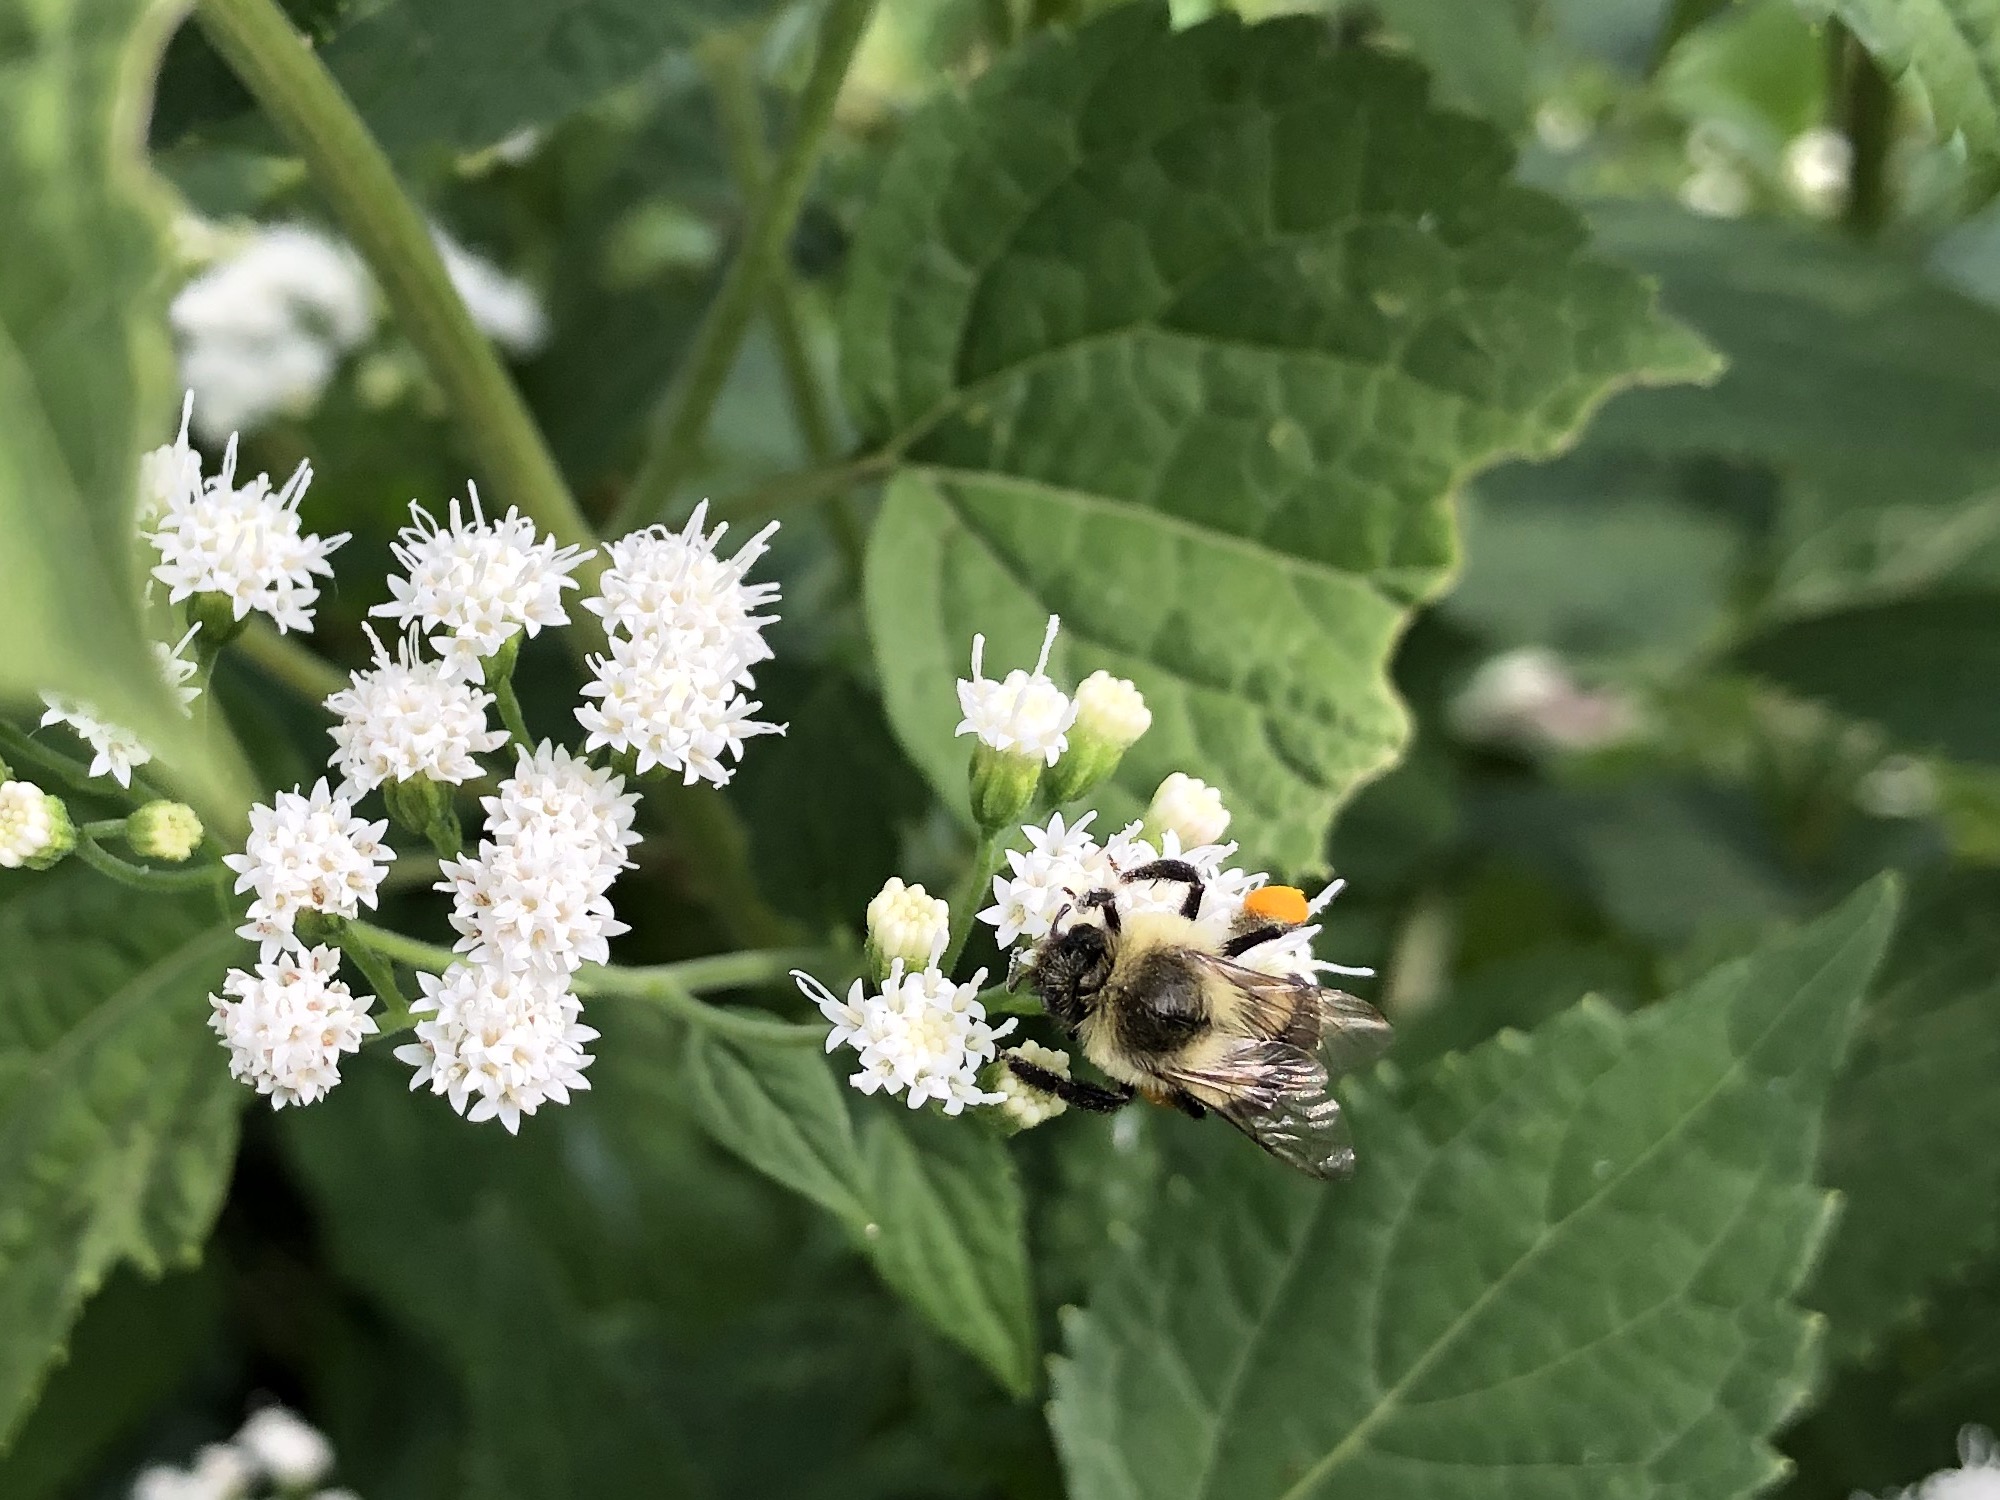 Bumblebee on Snakeroot at entrance of UW Arboretum at Seminole Drive in Madison, Wisconsin on September 2, 2021.